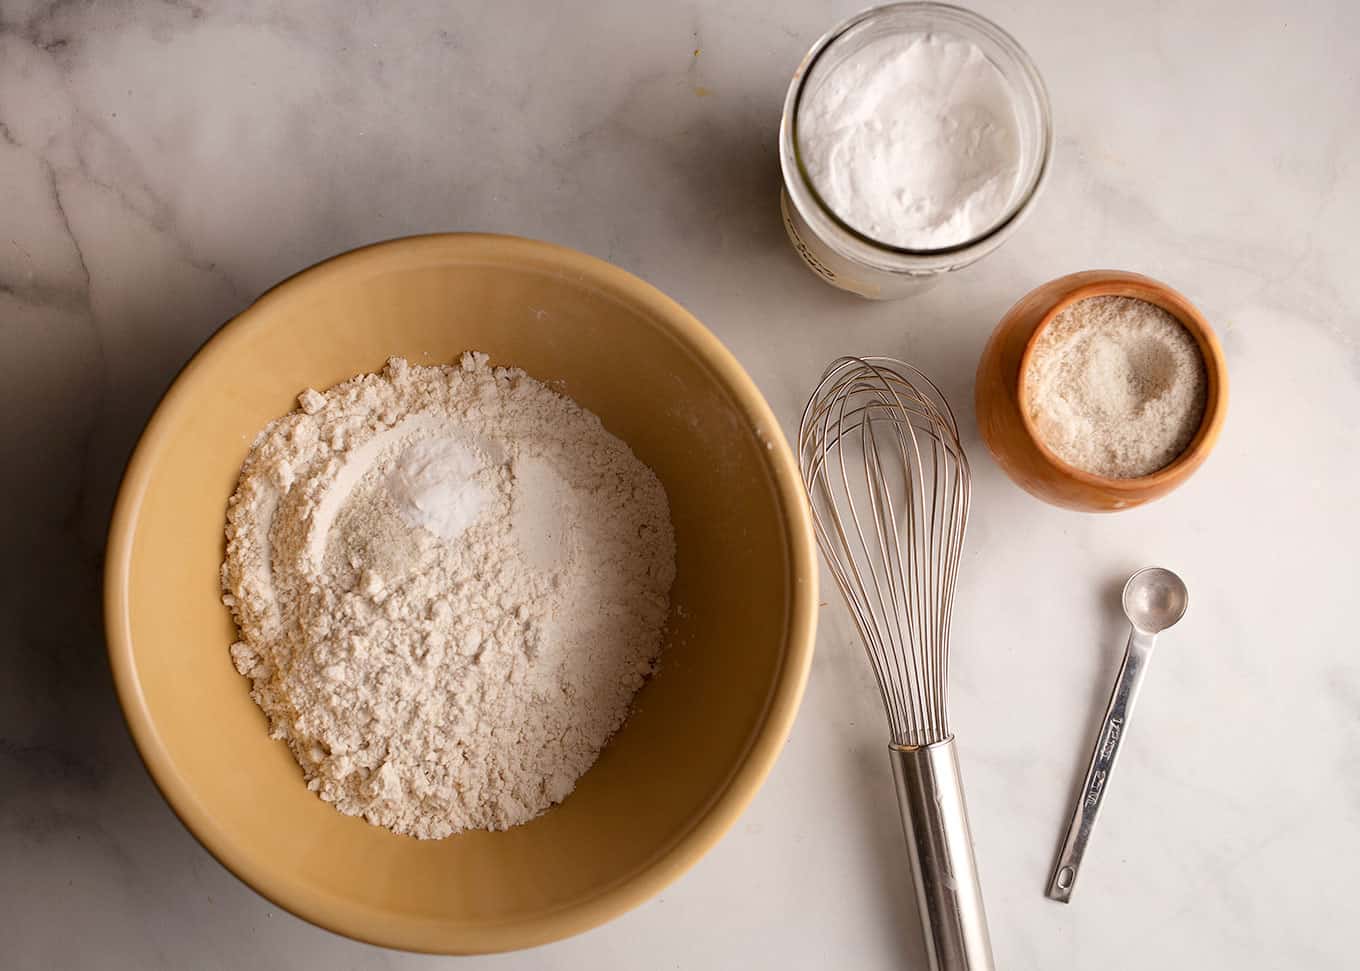 Flour, salt, and baking powder for the cake